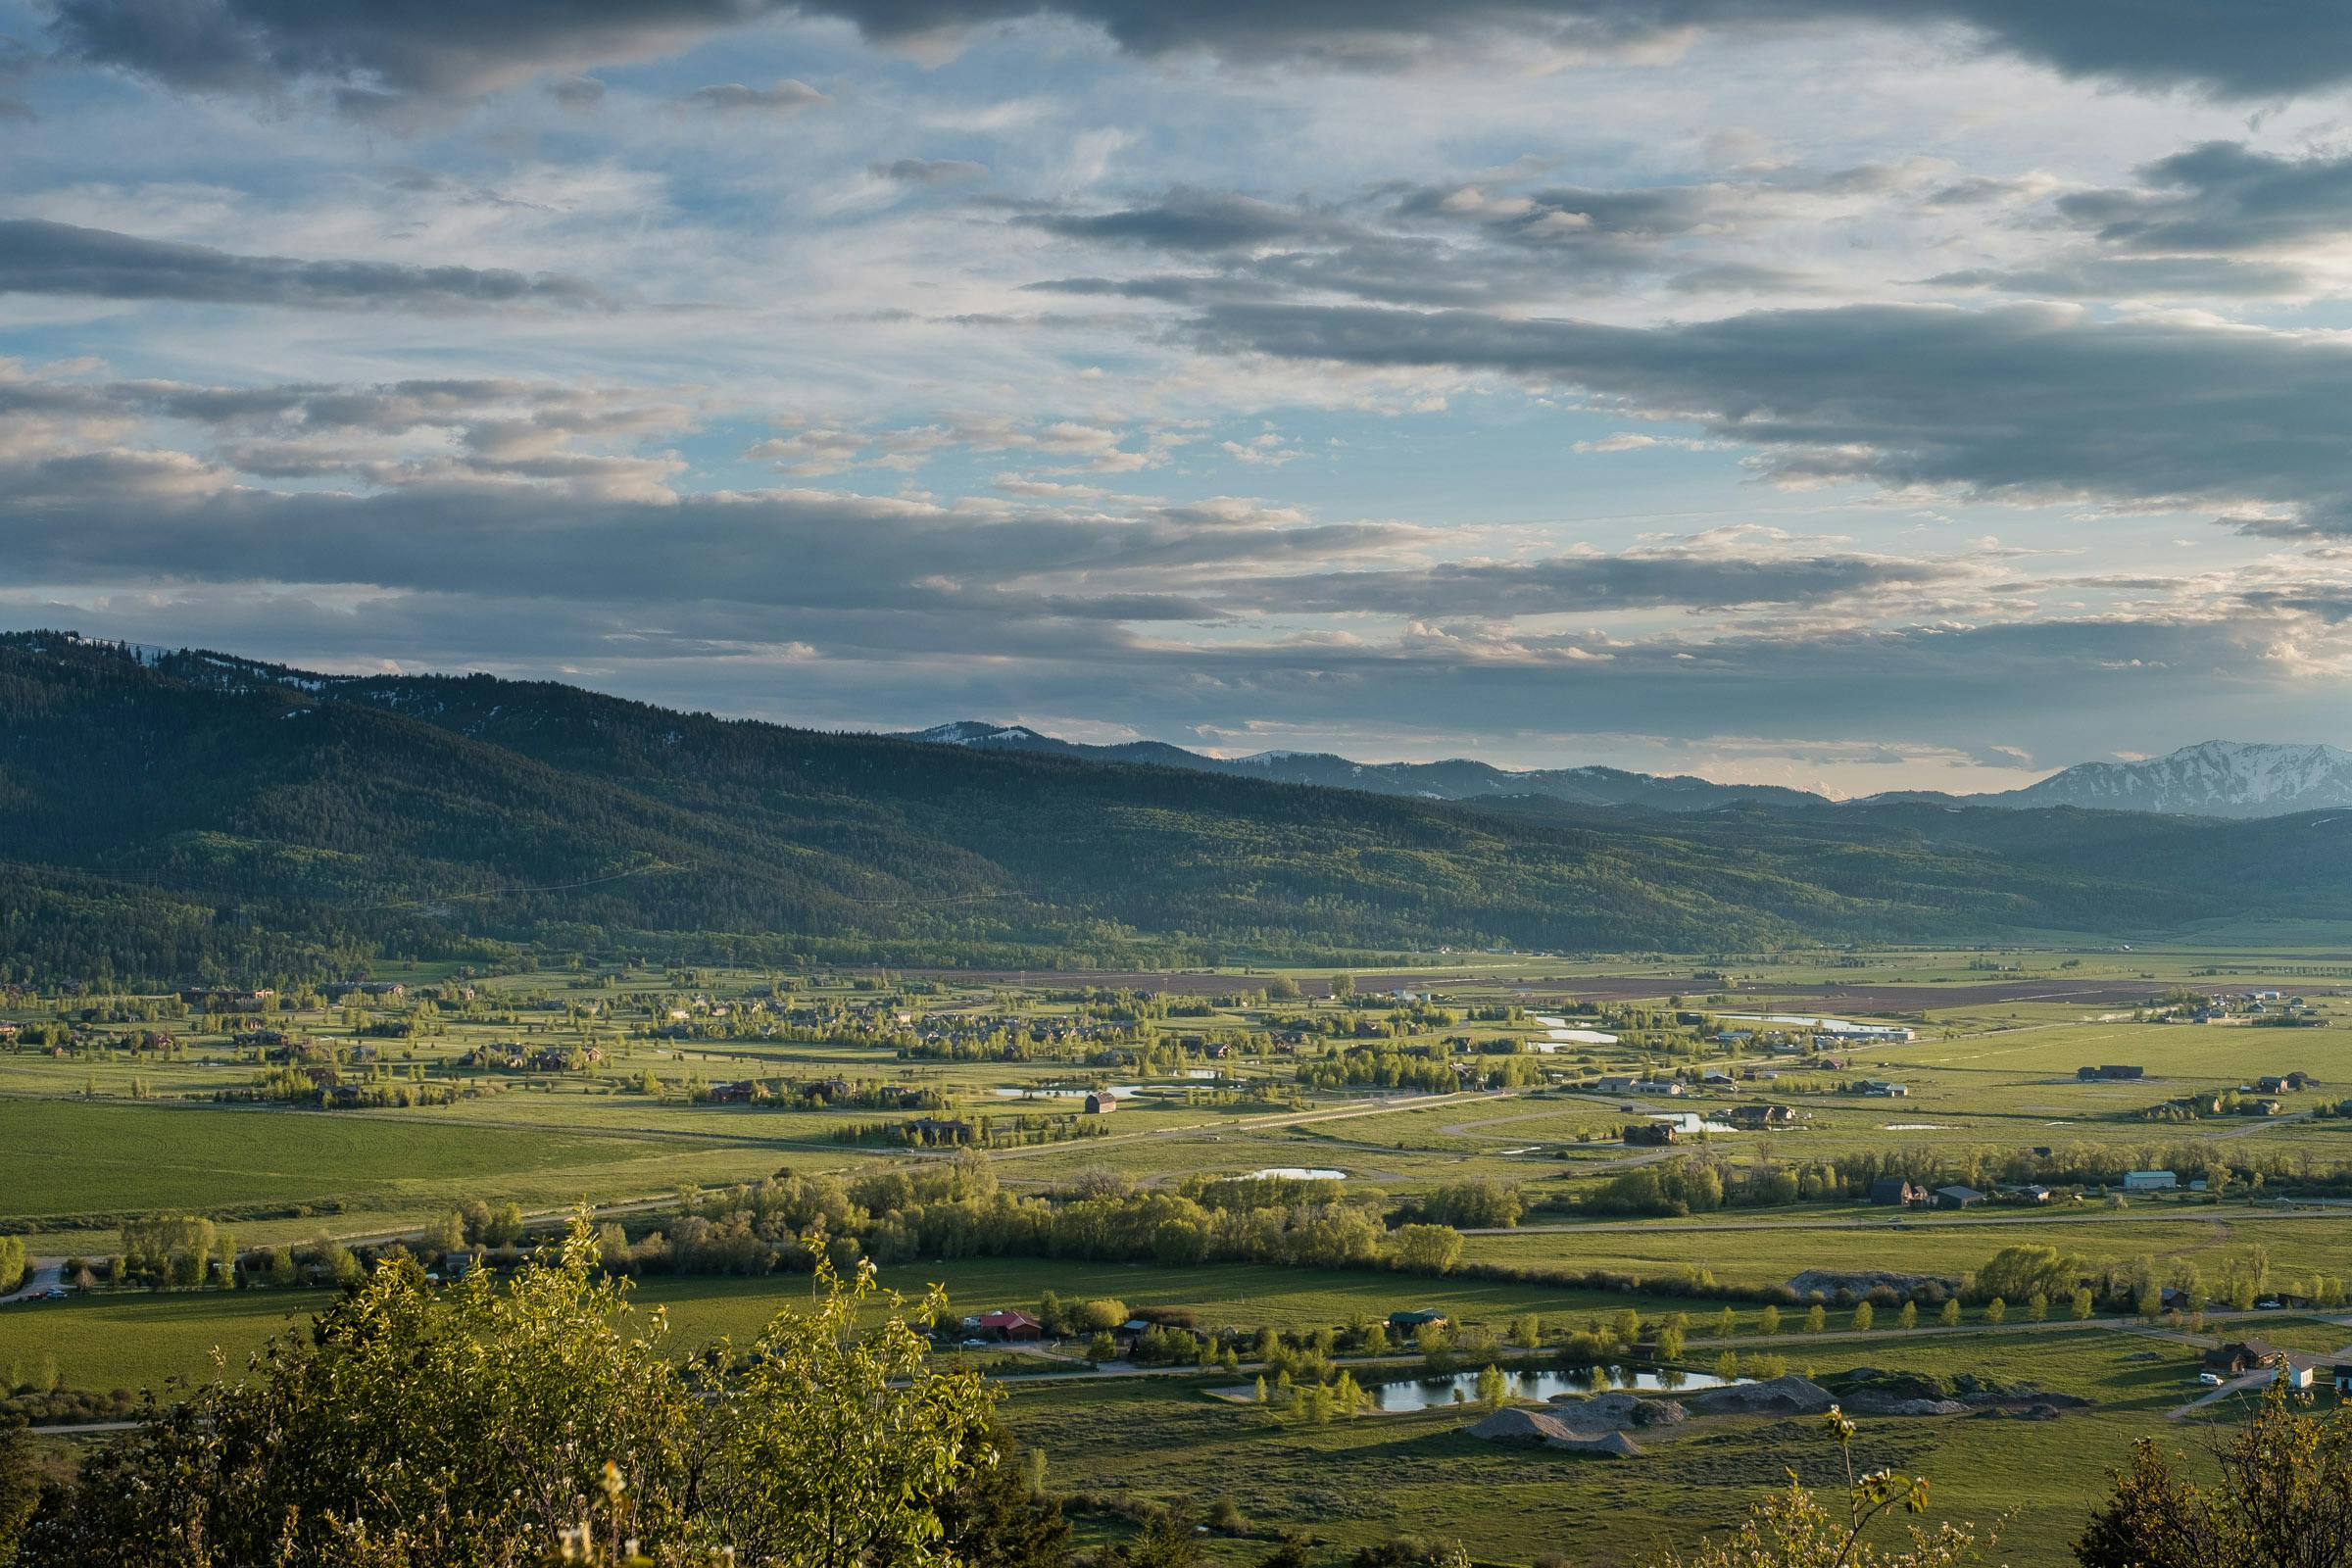 Aerial view of the city of Victor, Idaho at dusk